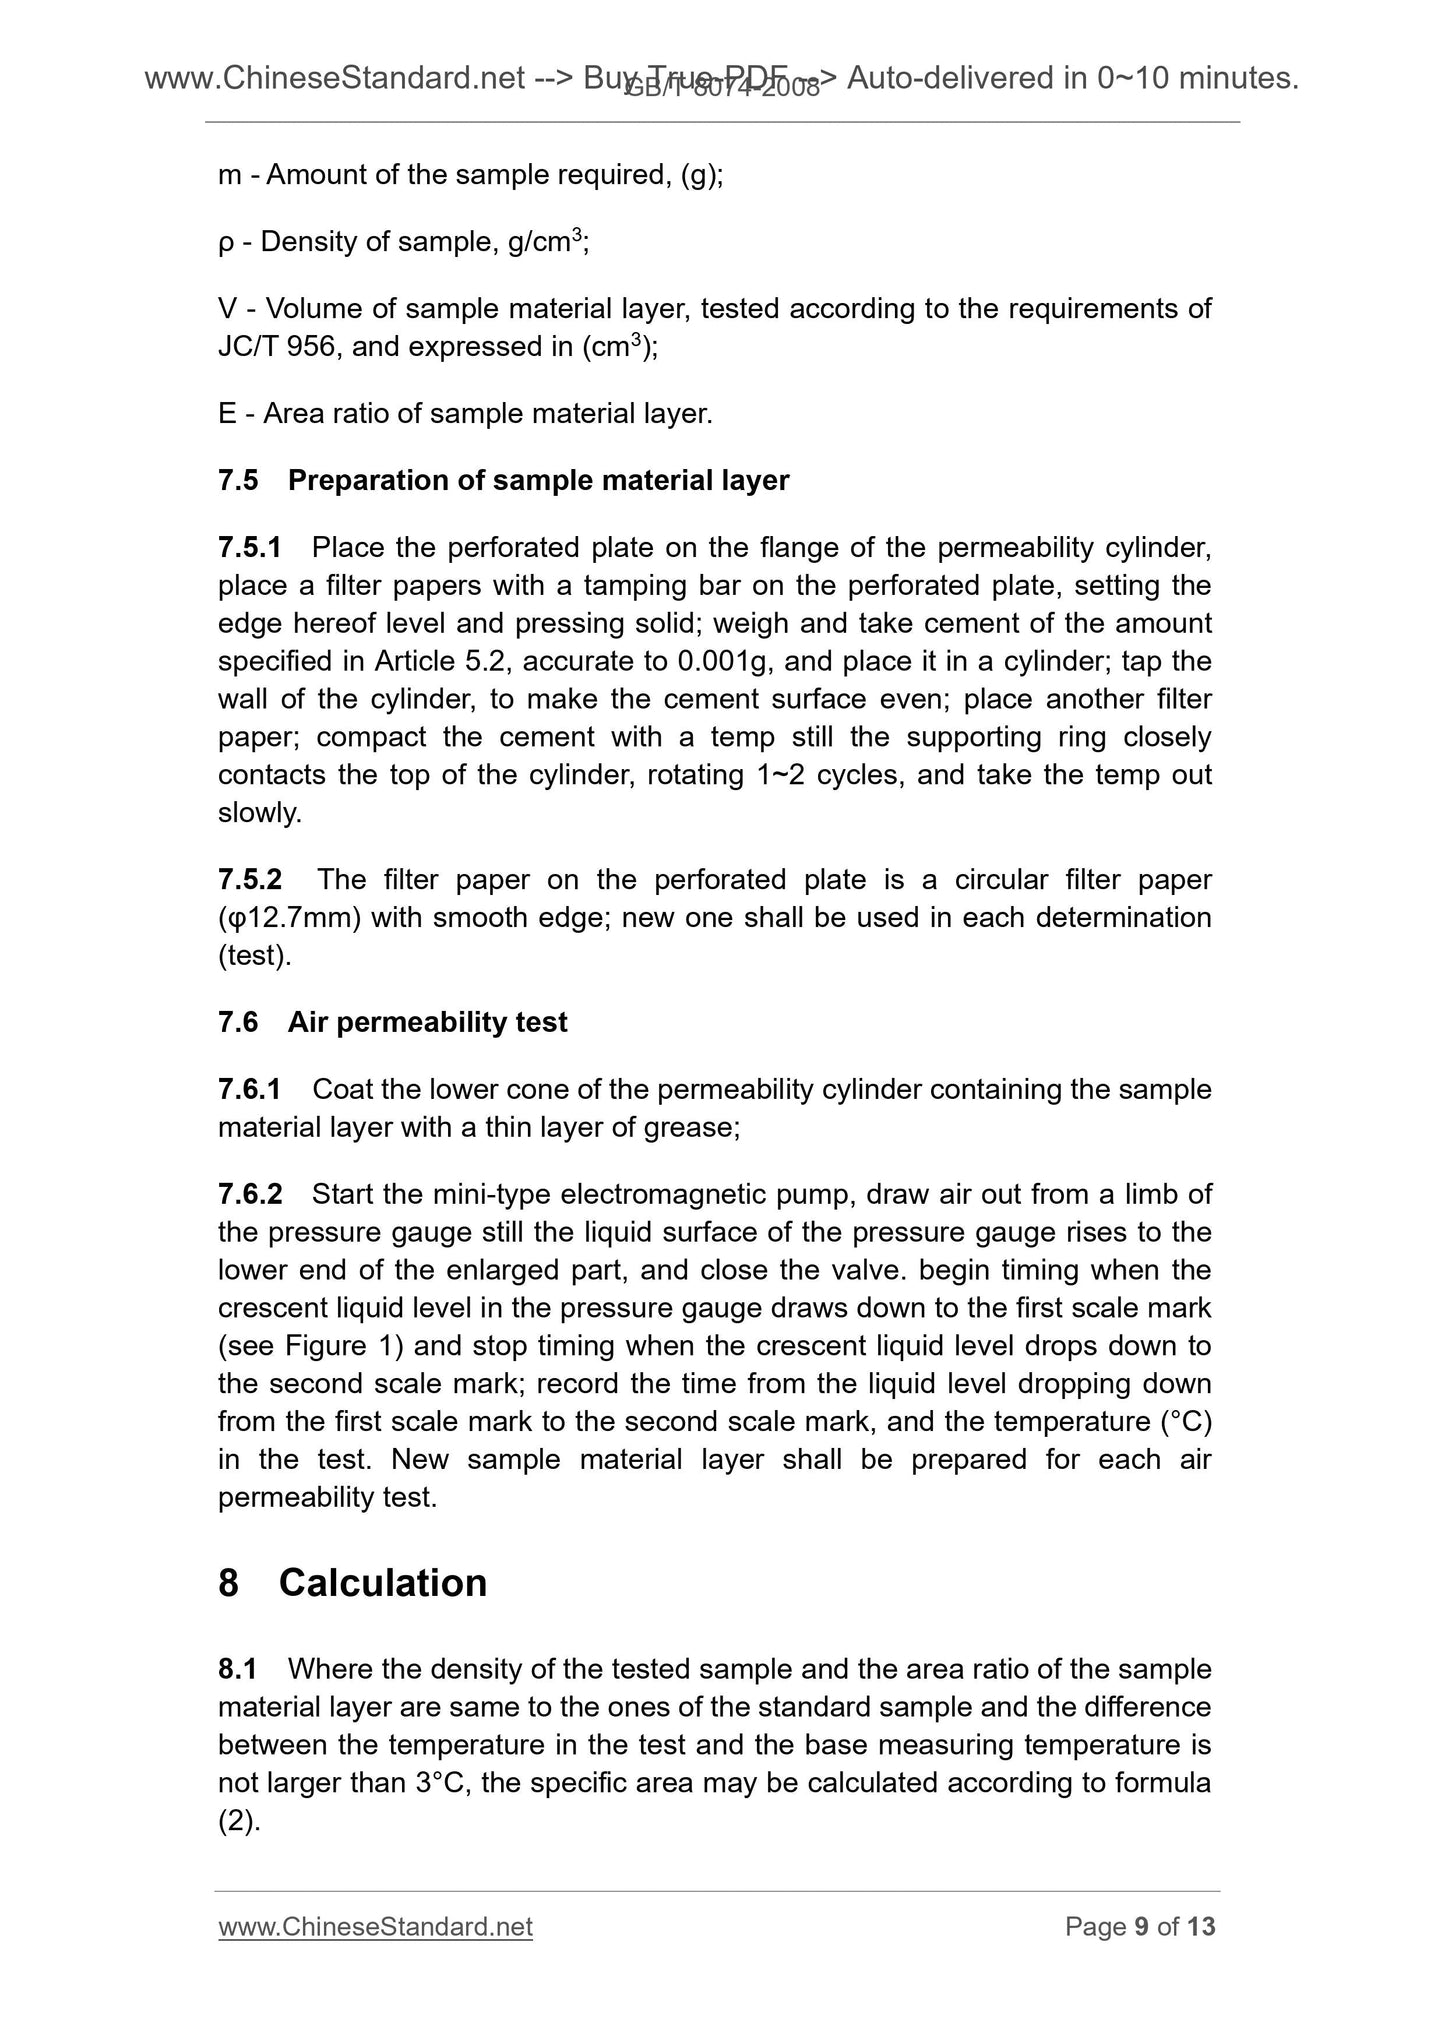 GB/T 8074-2008 Page 6